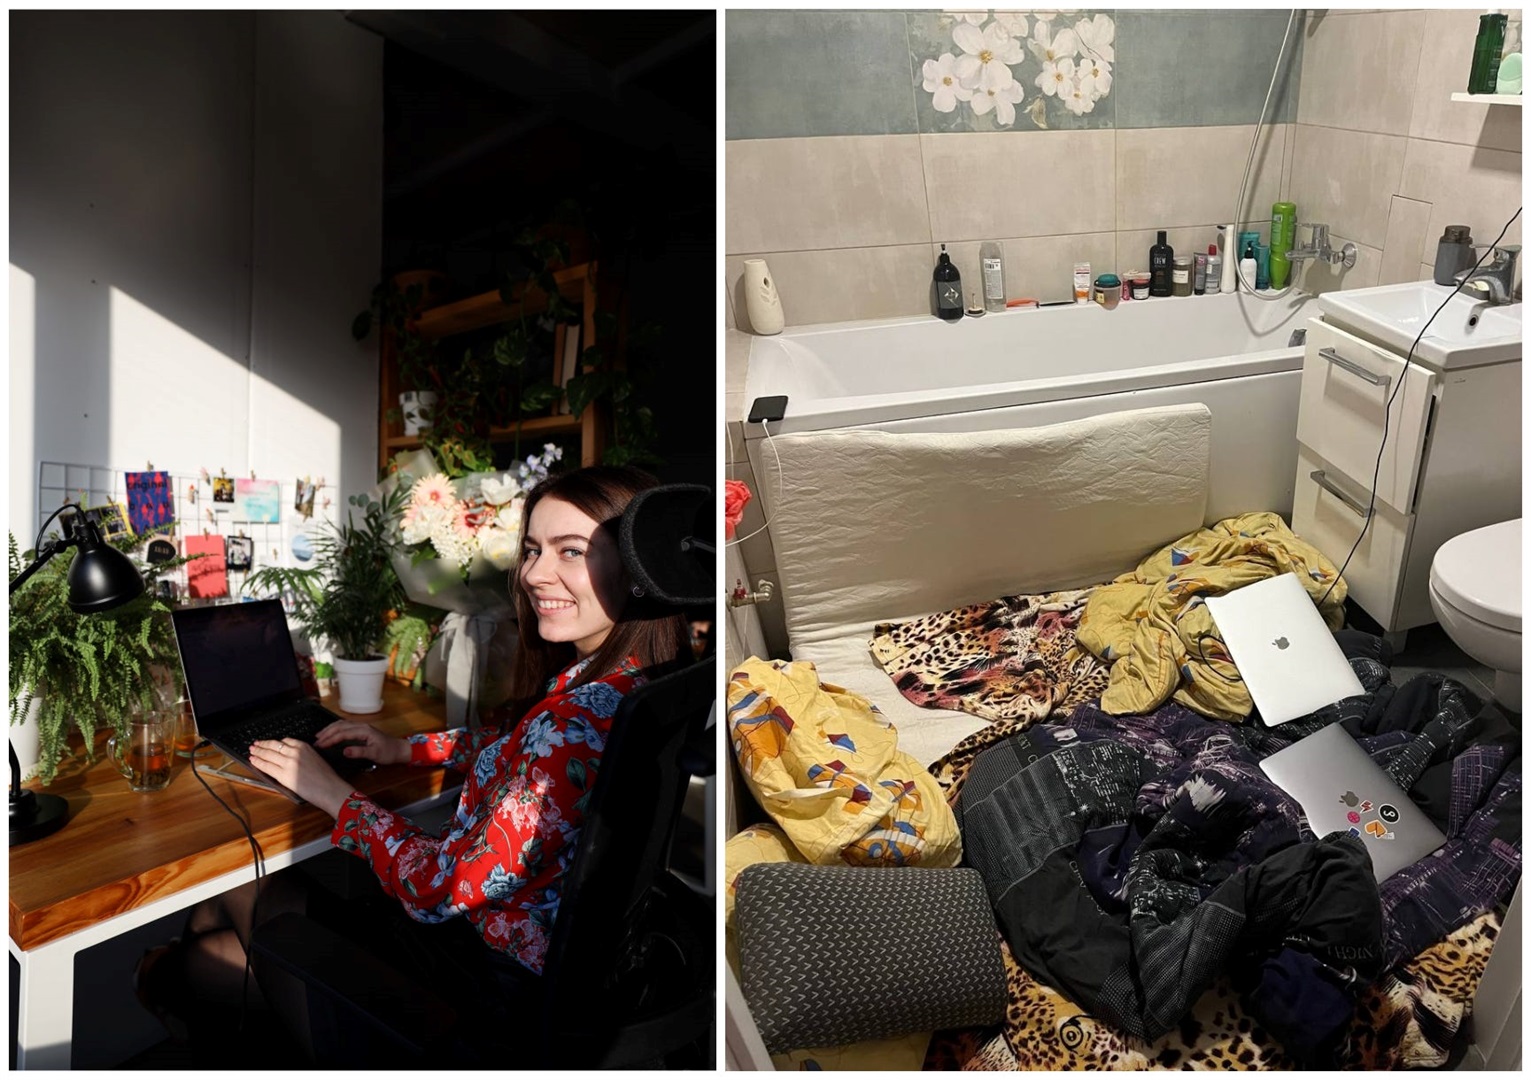 Outcrowd project manager worked from the company's Kharkiv office (L), but later sheltered to work from her bathroom in the early days of Russia's invasion (R).